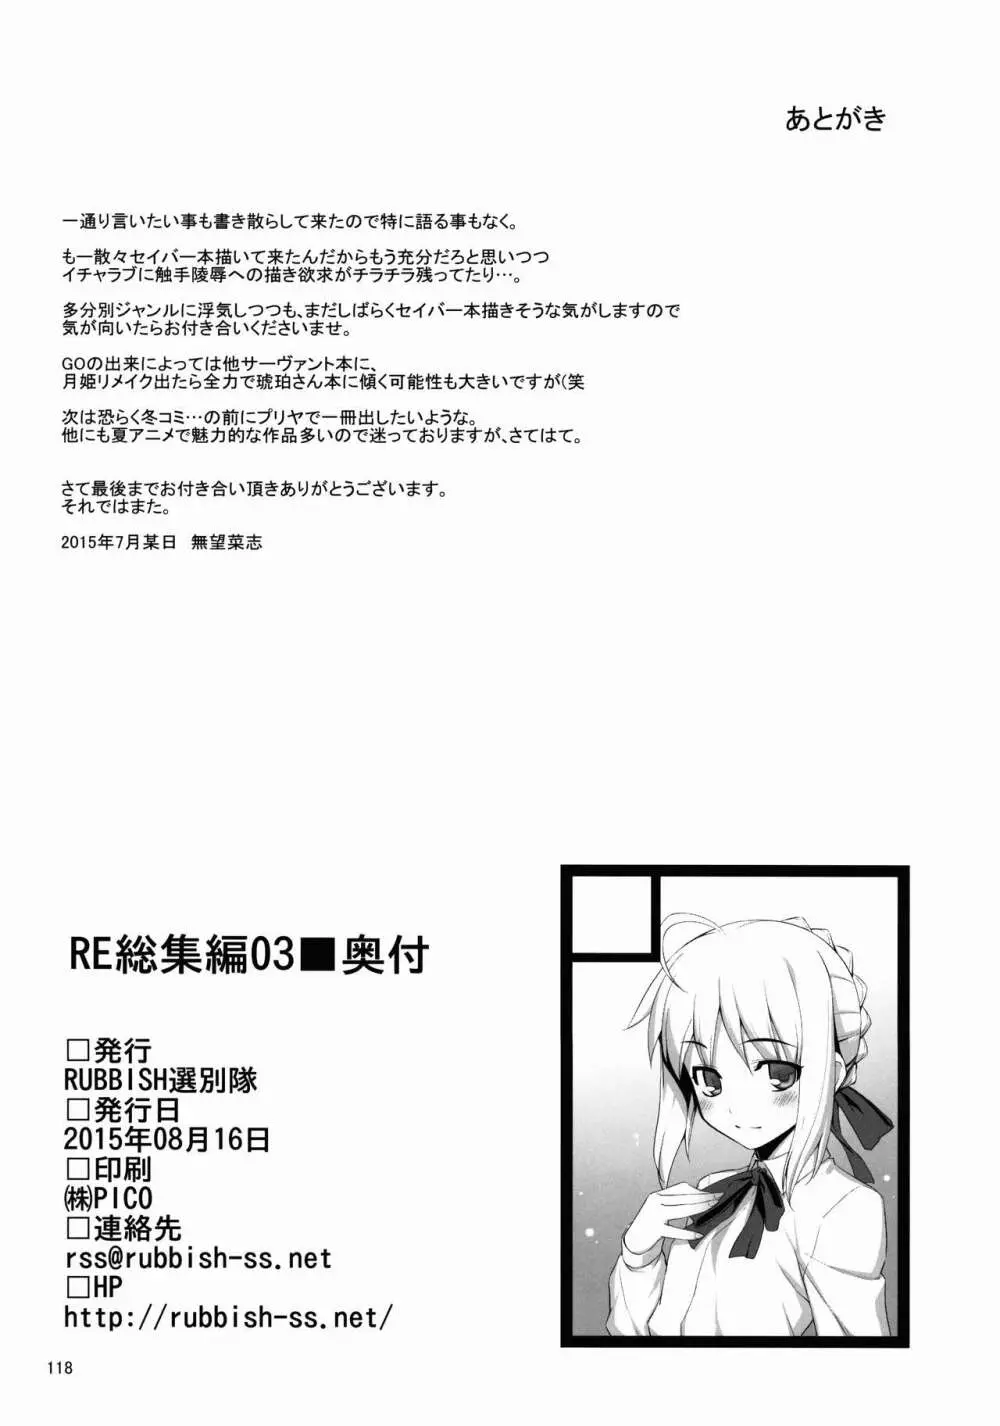 RE総集編03 - page116